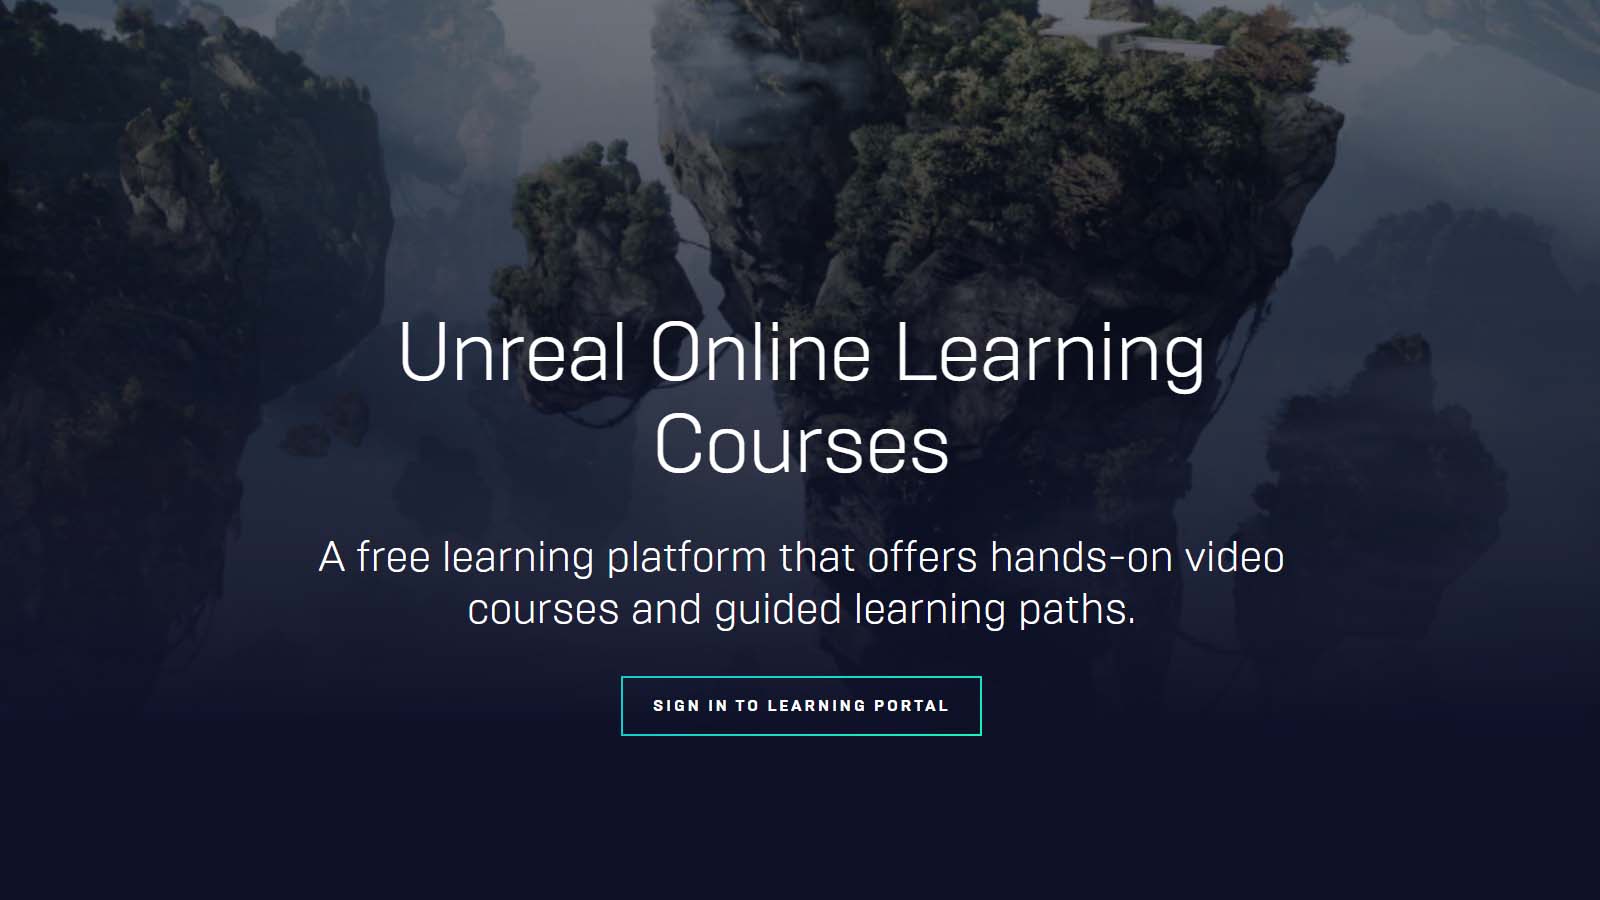 If you’re looking to learn about Unreal Engine, you’ll find a ton of free courses to get you started.